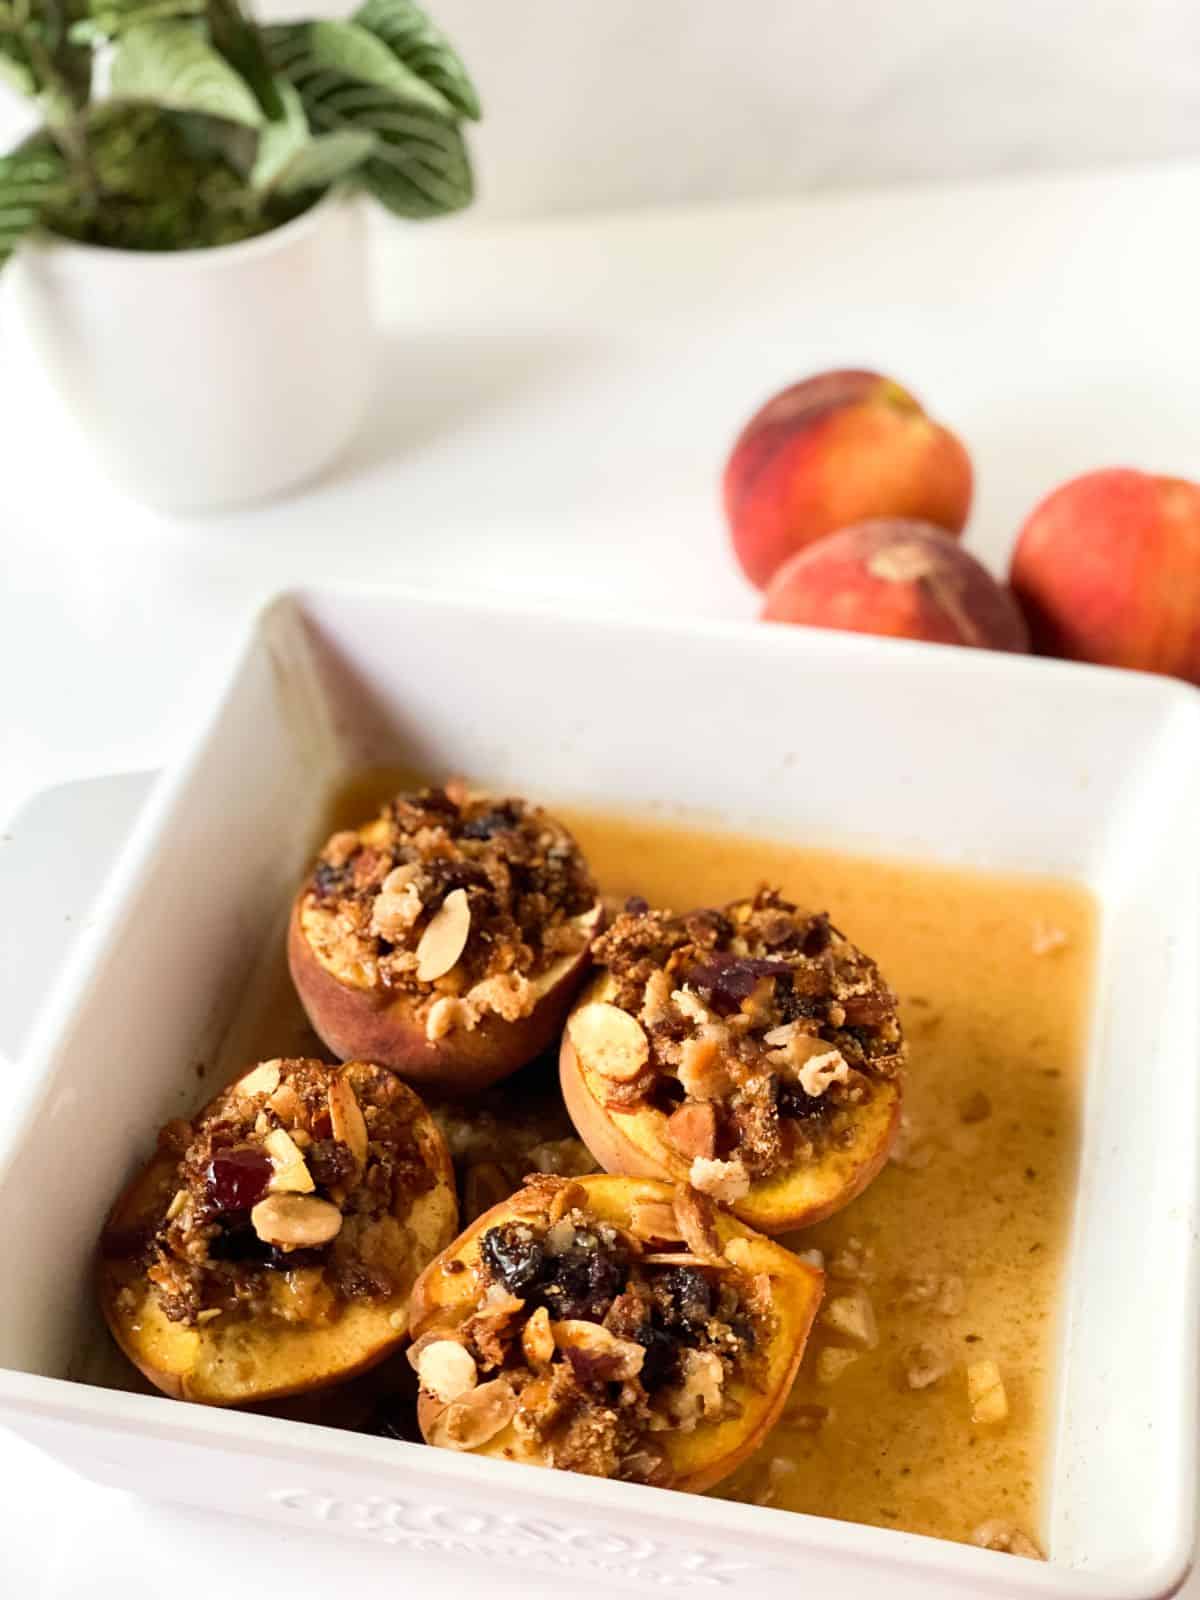 stuffed baked peaches in square white baking dish on white table by small plant